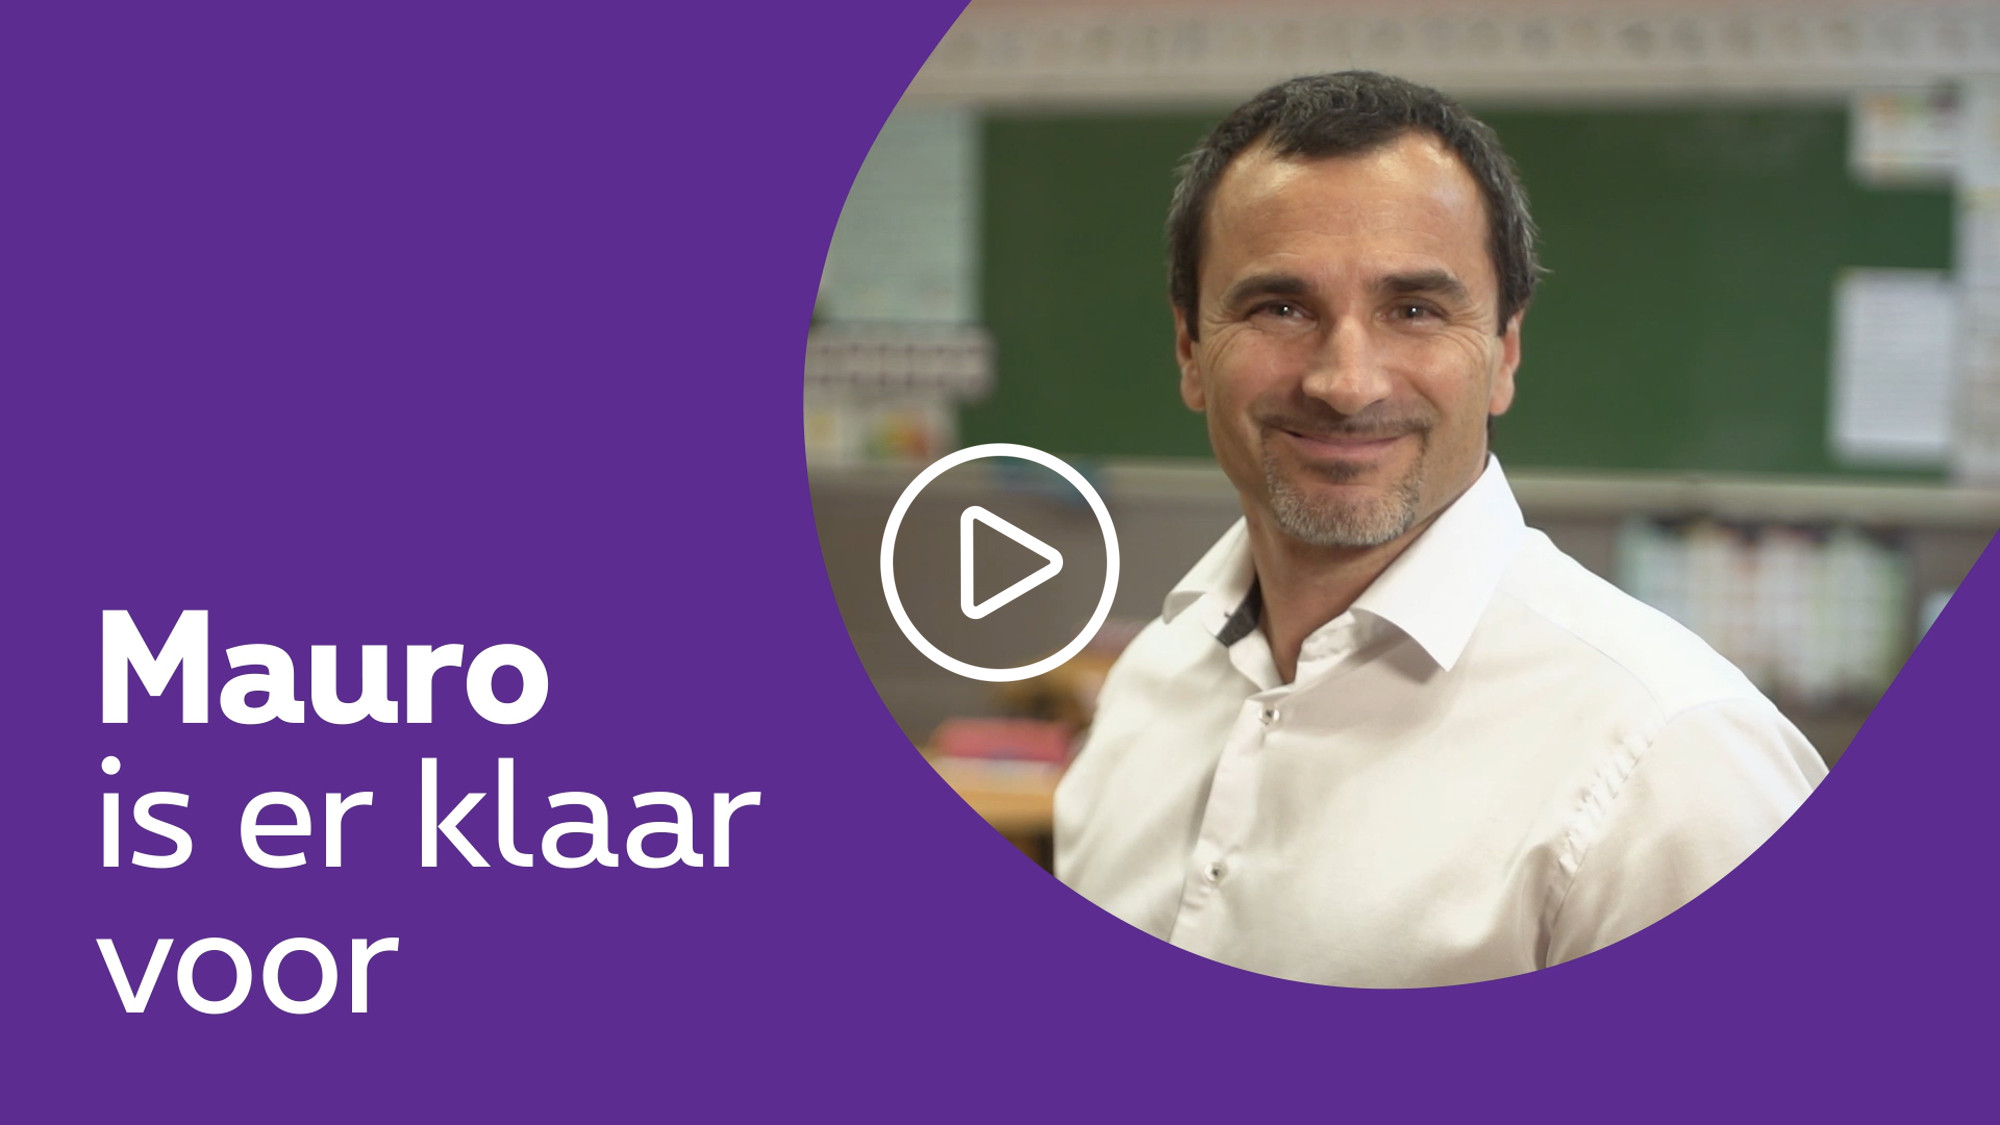 Mauro is klaar voor Internet Safe and Fun met Child Focus - click to see the video on YouTube